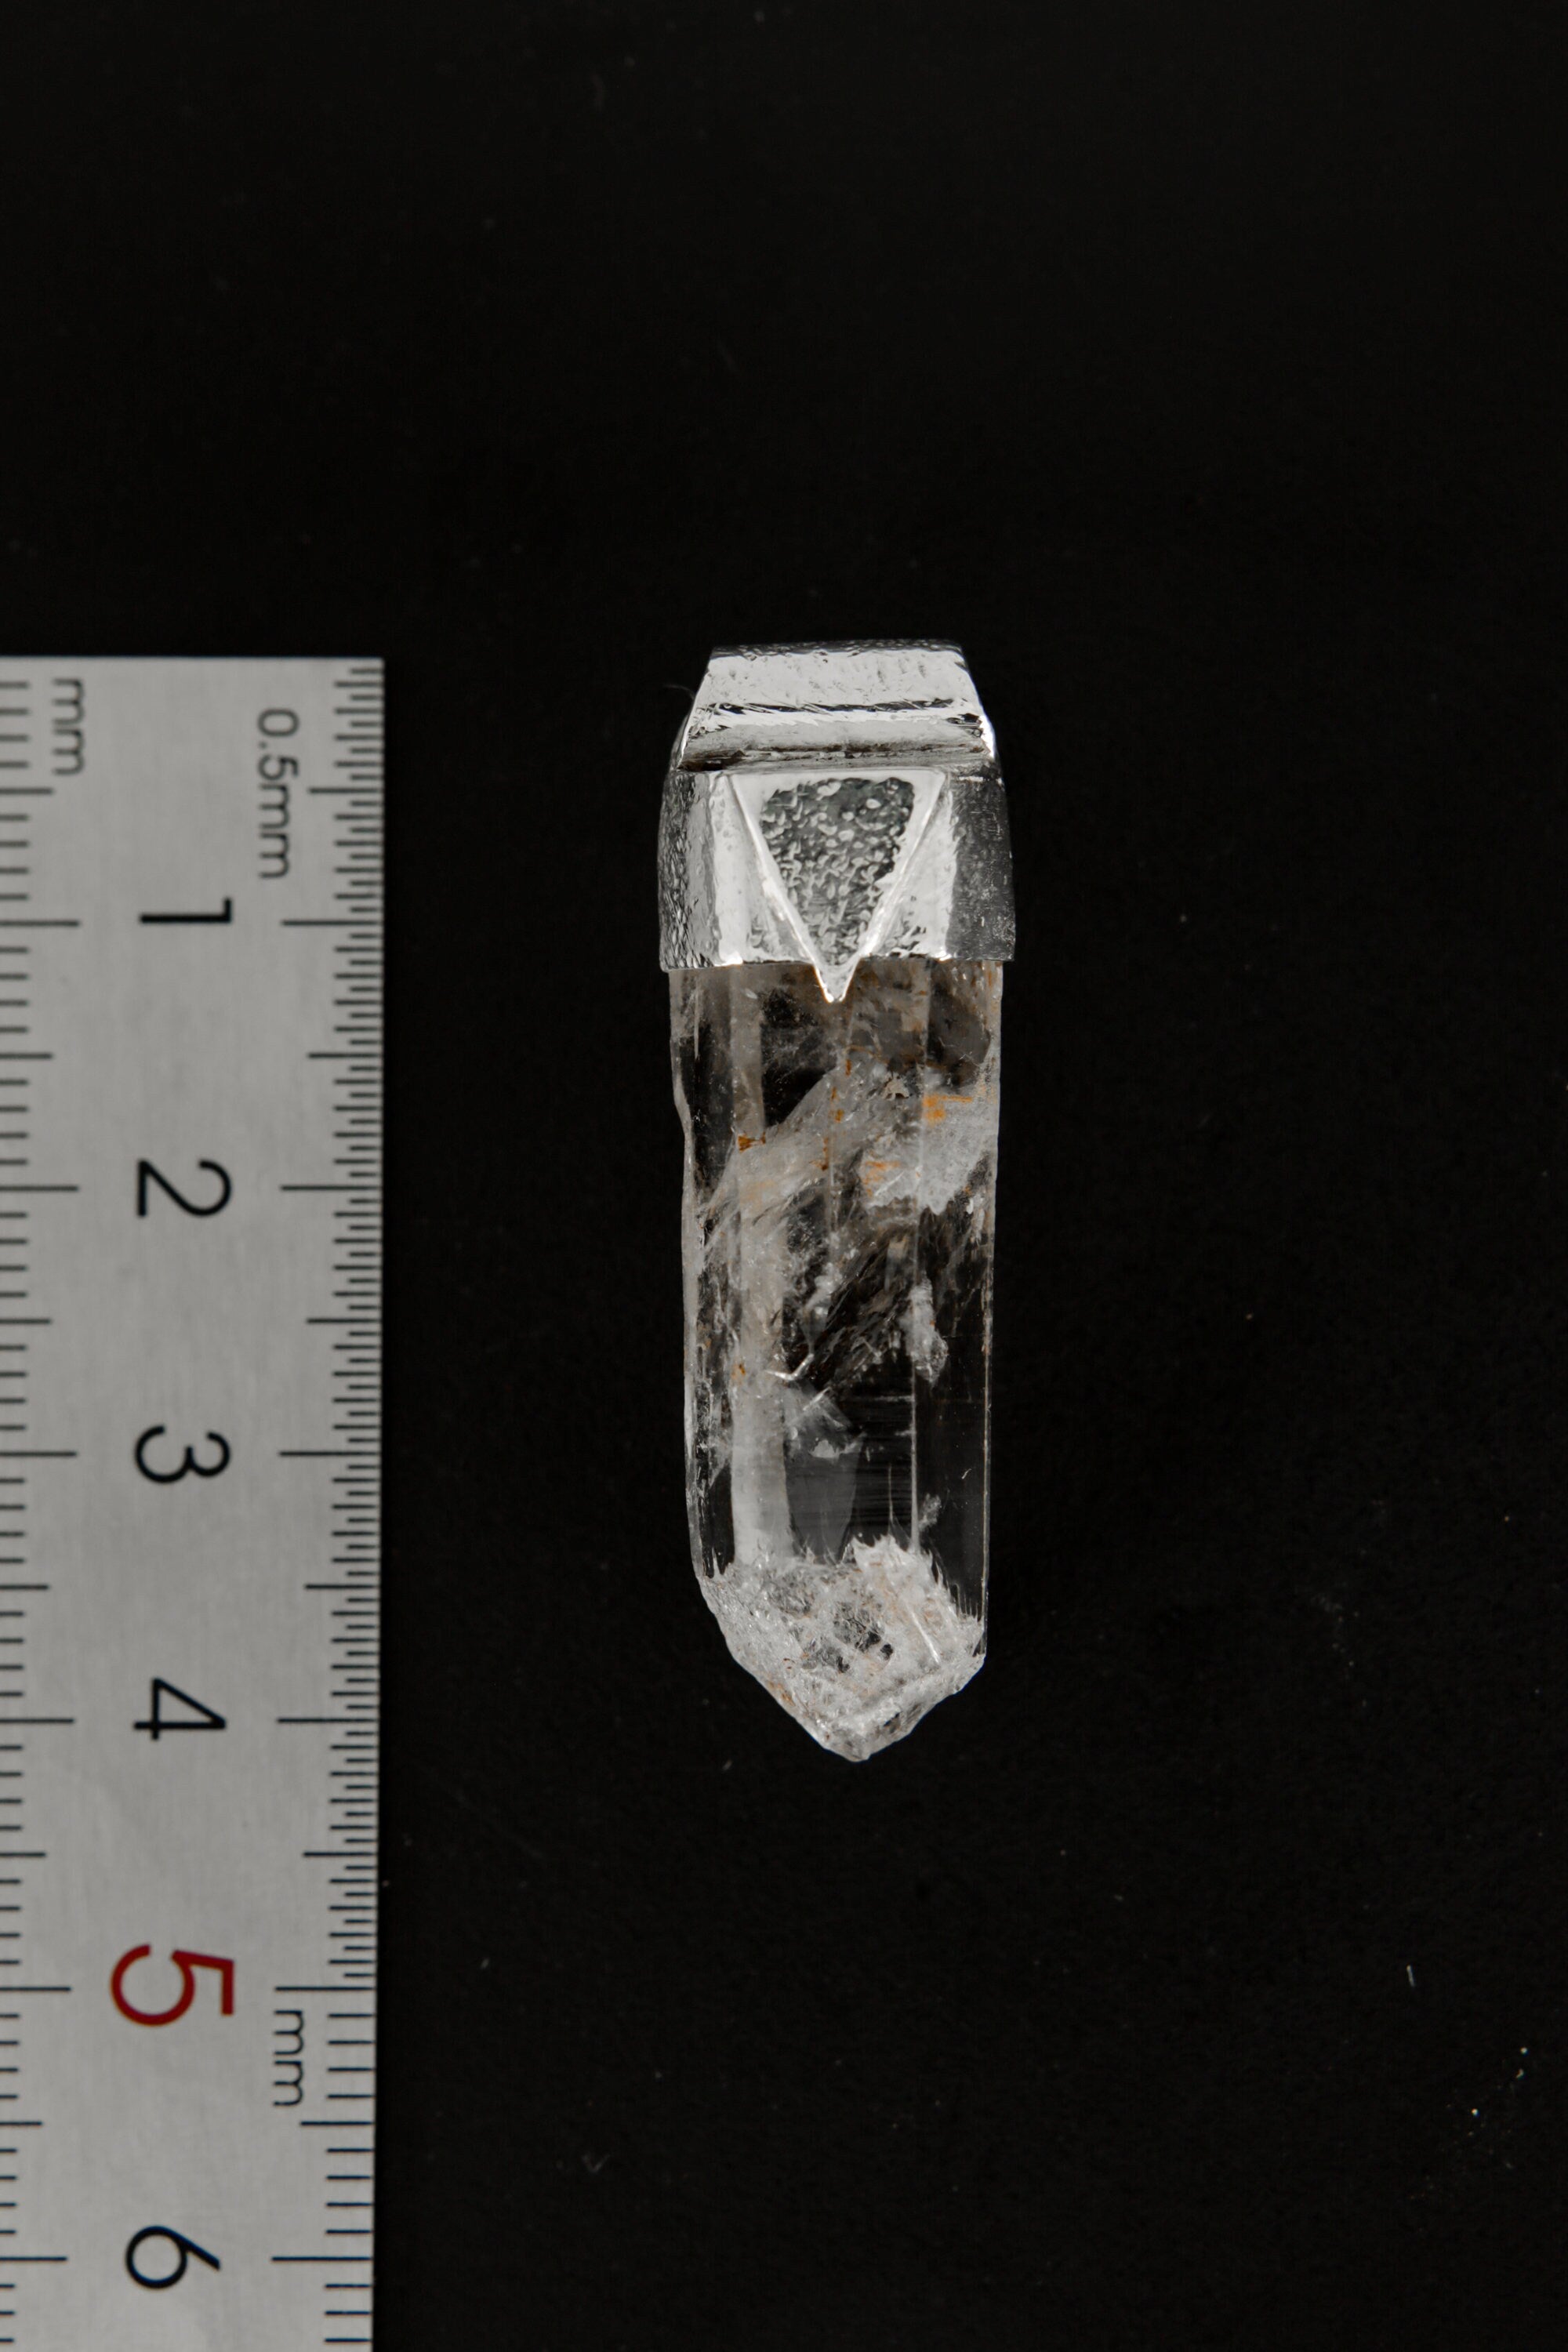 Lemurian Self Healed Phantom Pyrite Inclusion Quartz Point - Stack Pendant - Organic Textured 925 Sterling Silver - Crystal Necklace